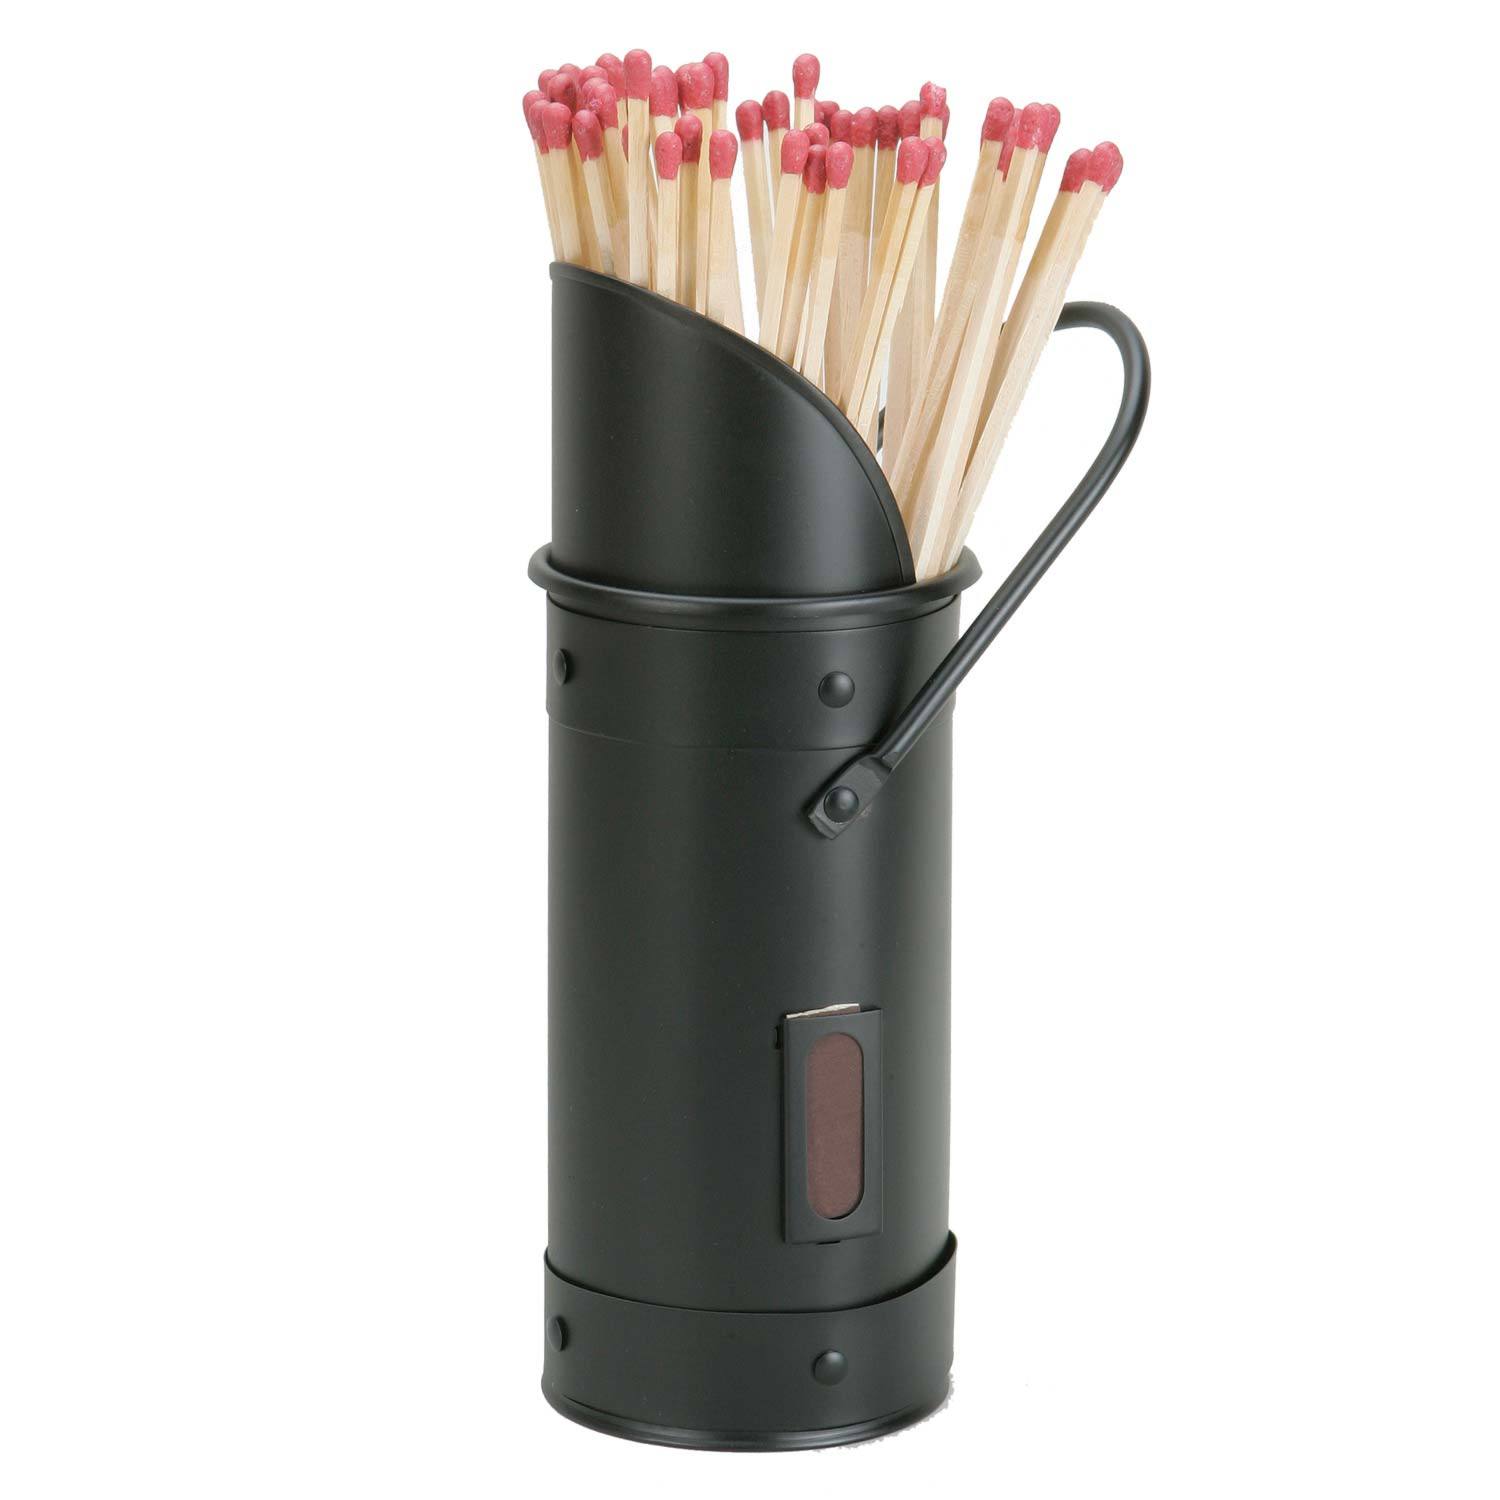 Metal Match Holder with Matches - Black Image 1